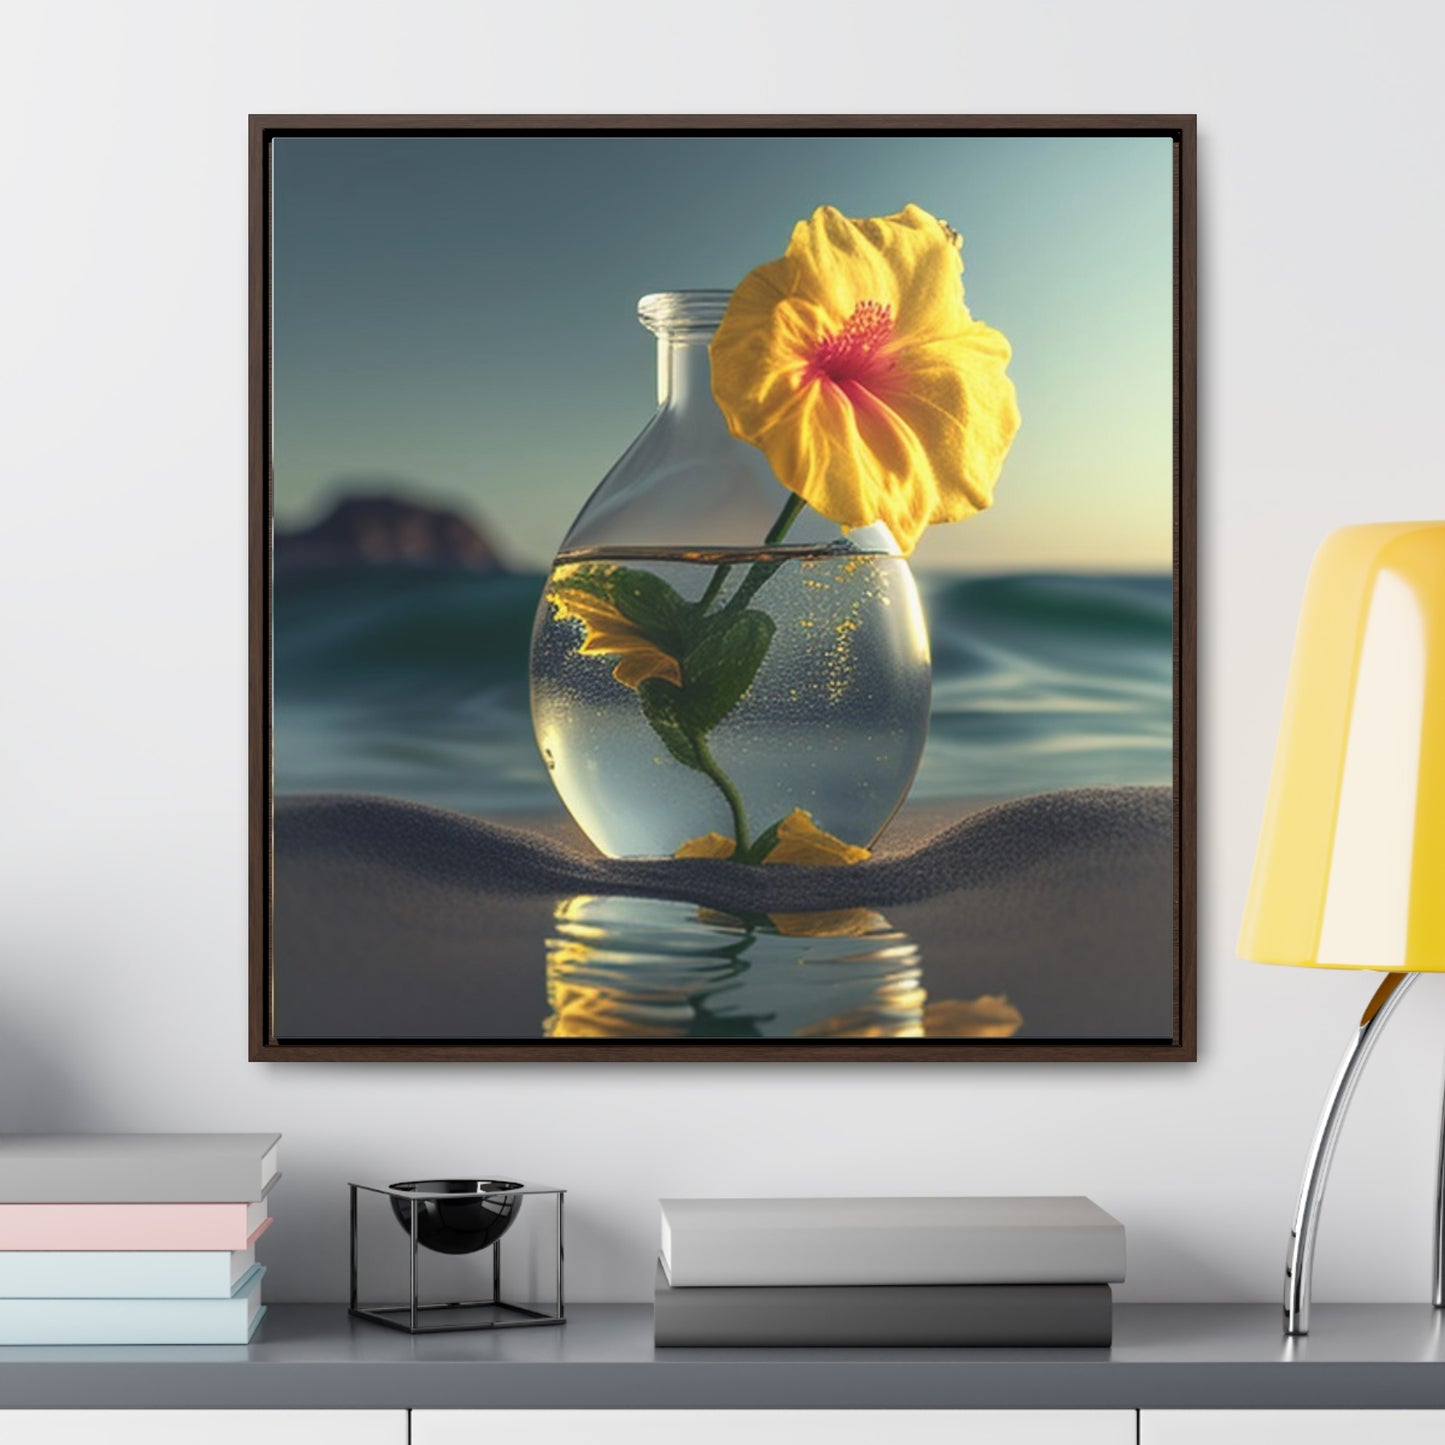 Gallery Canvas Wraps, Square Frame Yellow Hibiscus glass 2